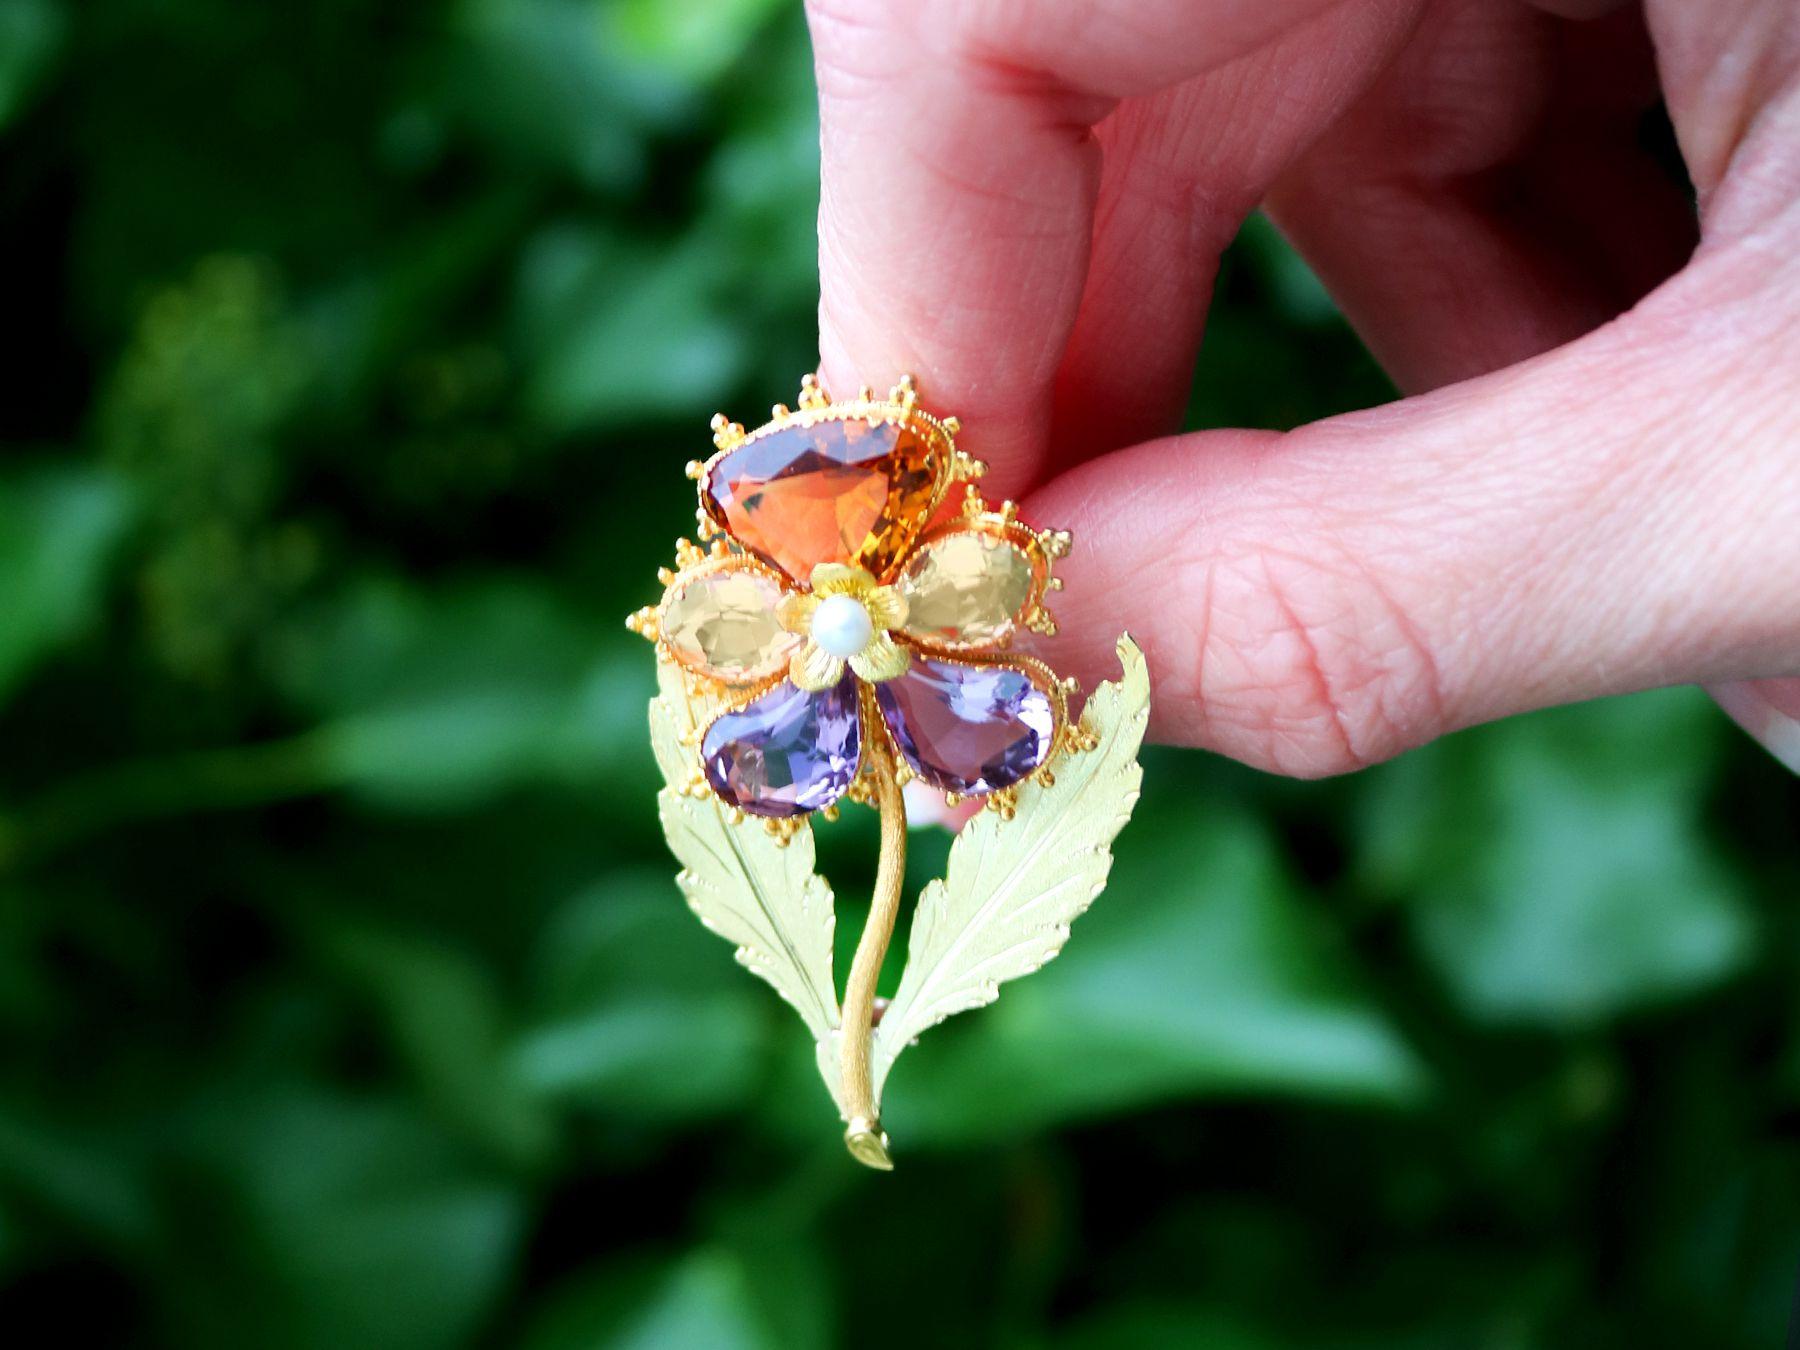 A stunning, fine and impressive antique 2.26 carat smoky quartz, 3.95 carat amethyst, pearl and citrine, 18 karat and 12 karat yellow gold brooch in the form of a pansy; part of our diverse antique jewelry and estate jewelry collections

This